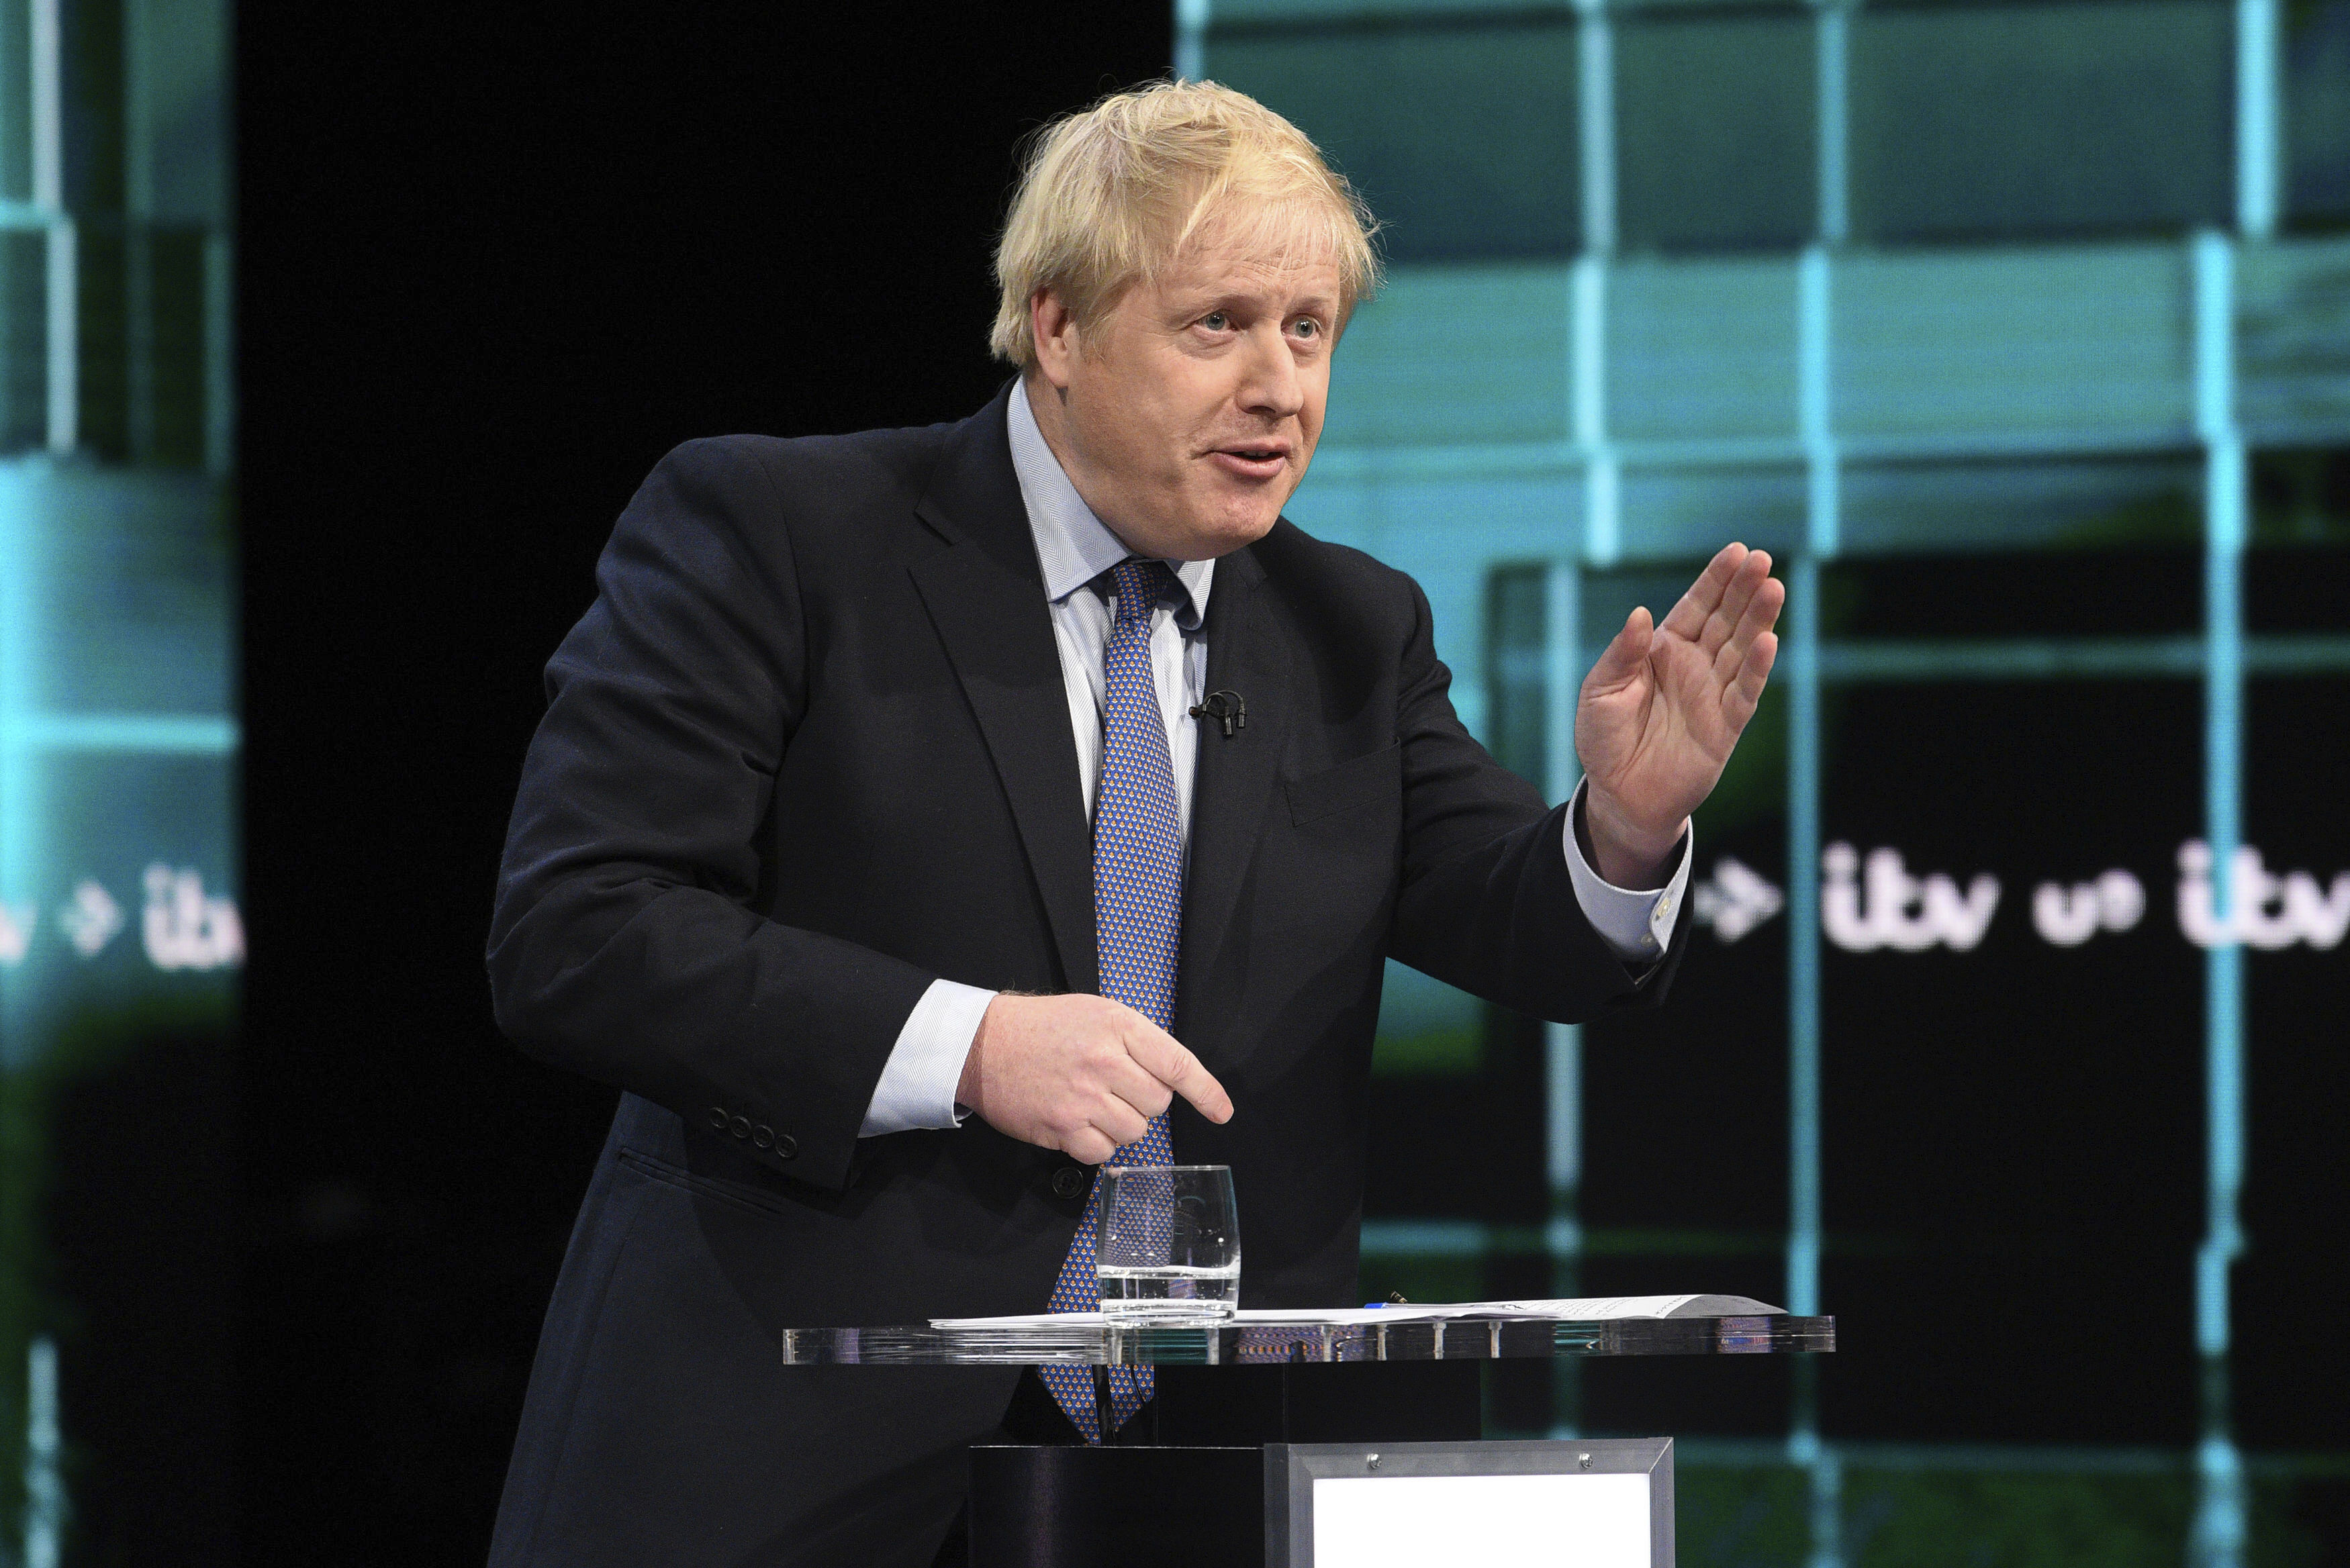 Boris Johnson reacts during the election head-to-head debate live on TV in Salford, Manchester onTuesday.